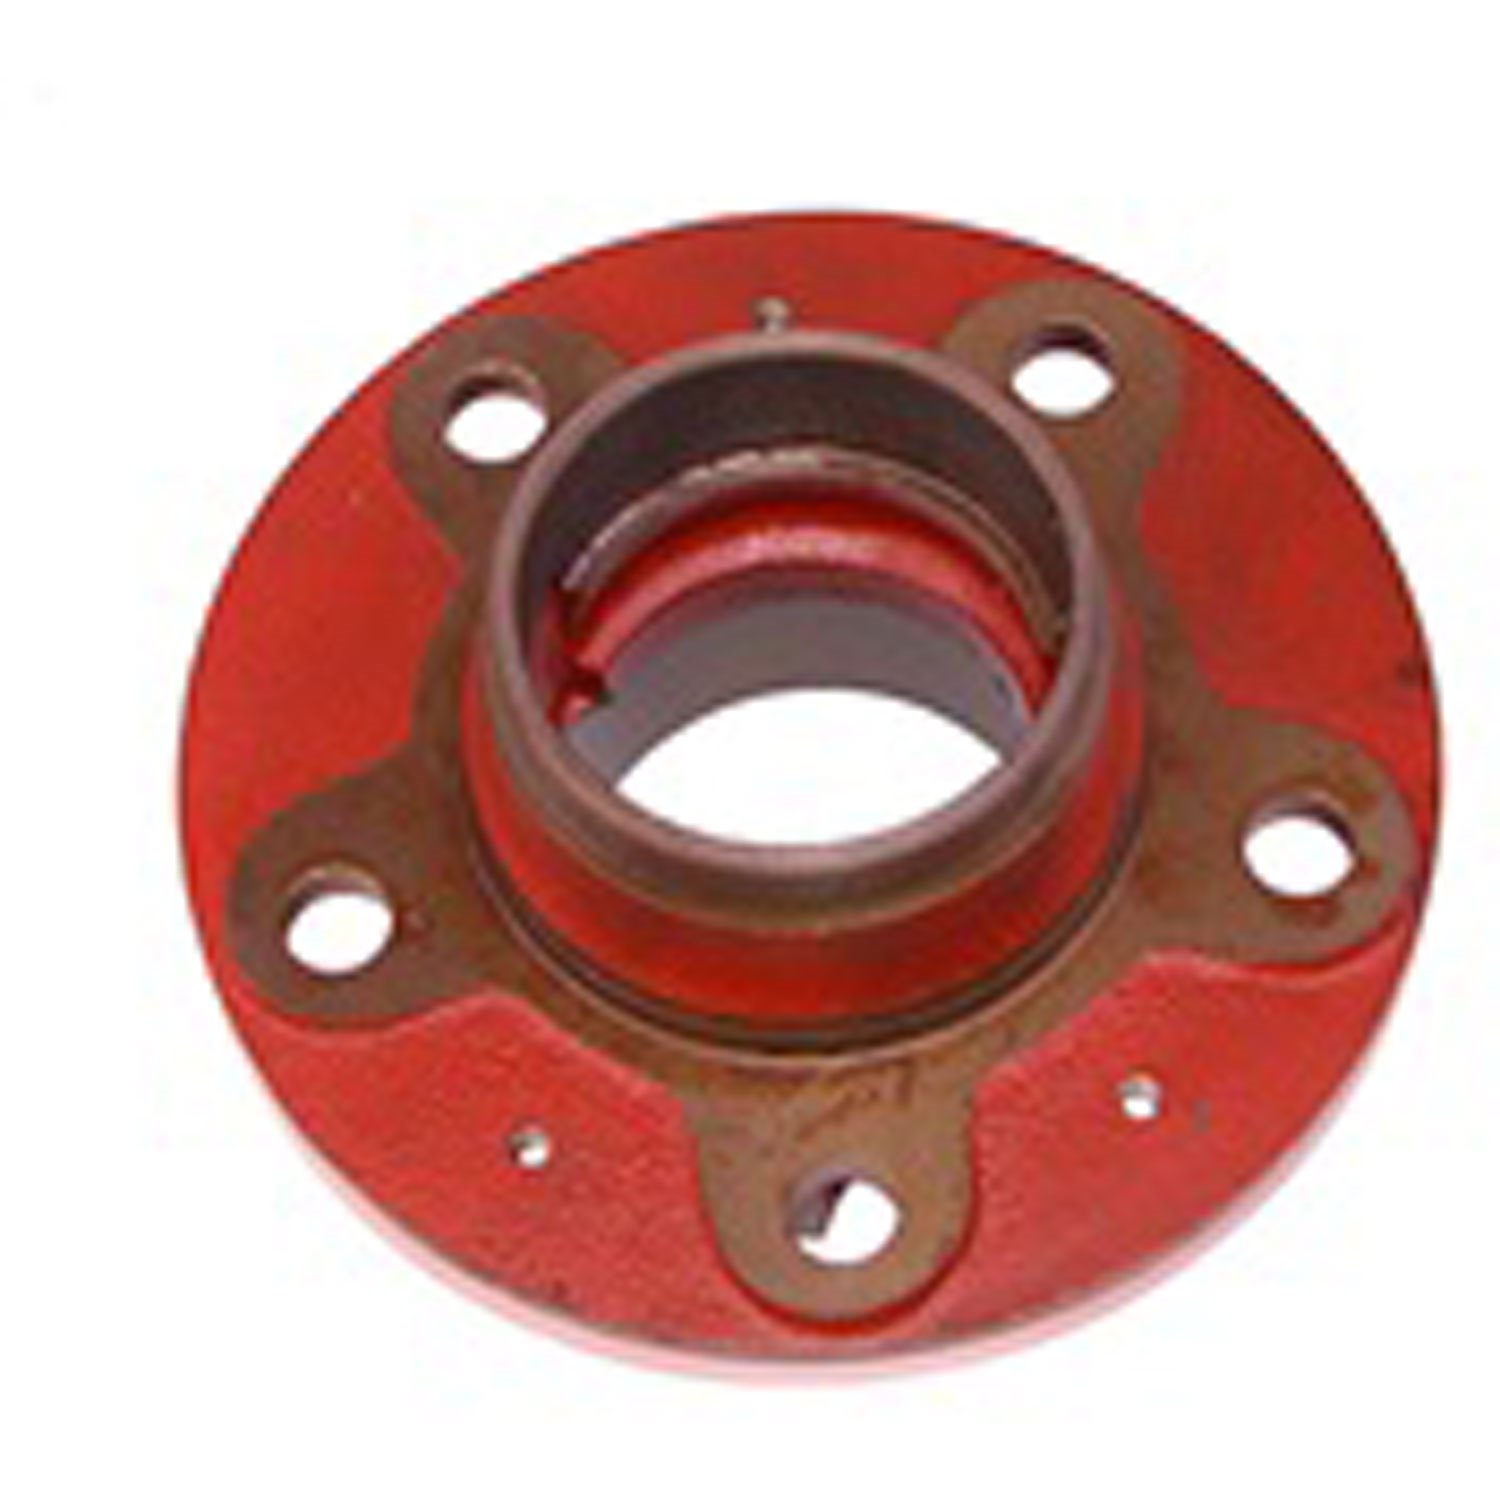 This front axle hub assembly from Omix-ADA fits 41-68 Ford GPWs and Willys CJ models. 5 lug no wheel studs.